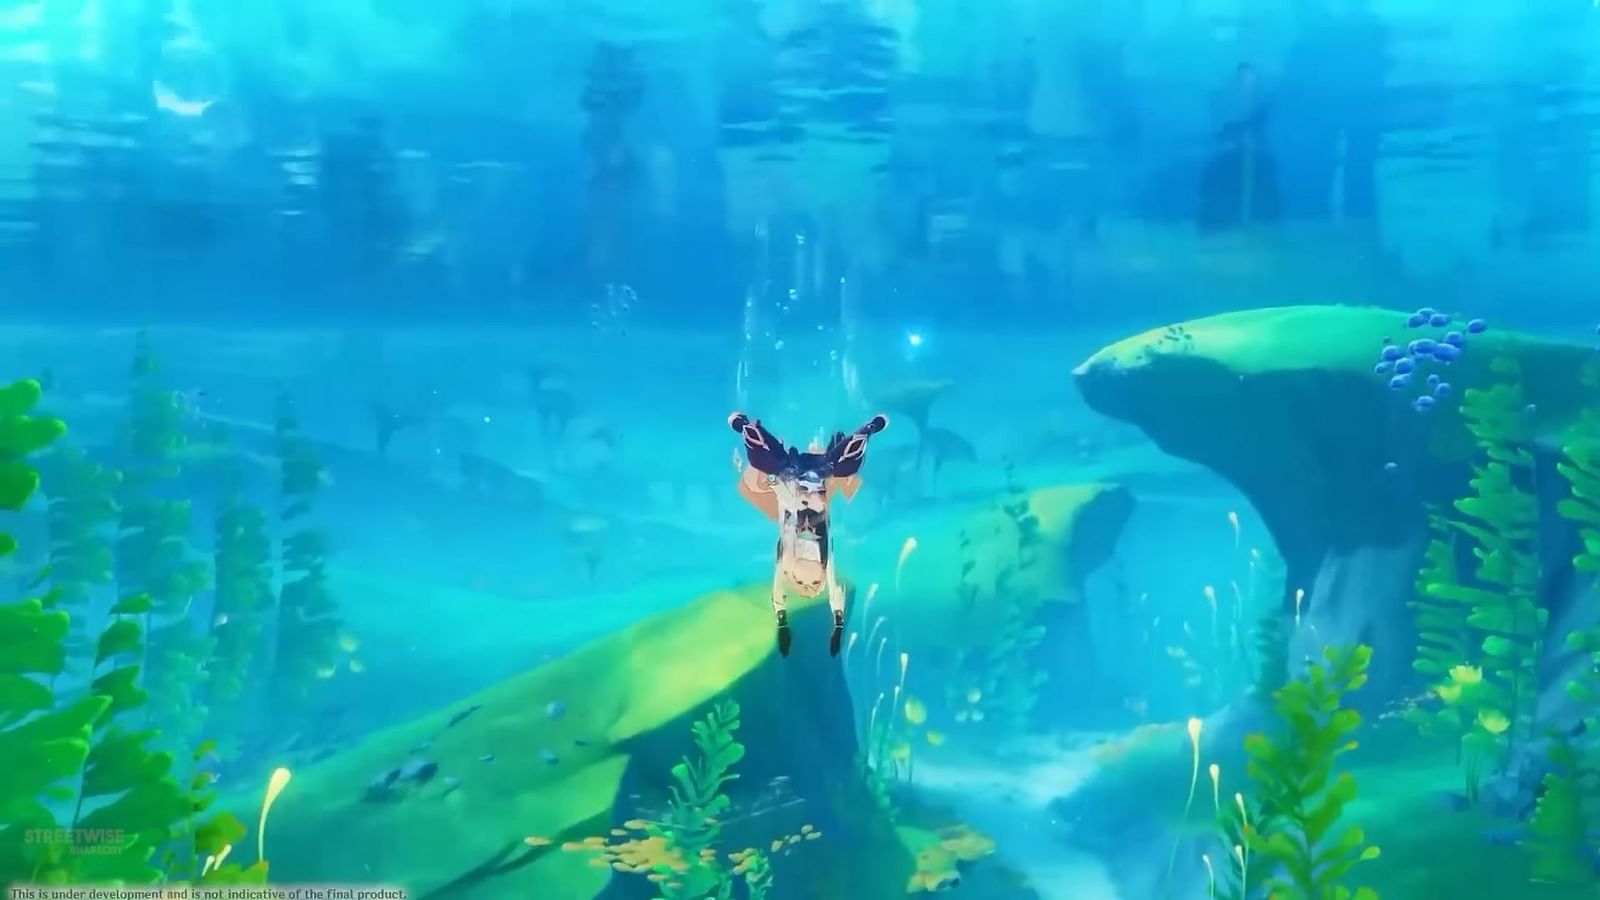 Genshin Impact teases Fontaine underwater gameplay and first look